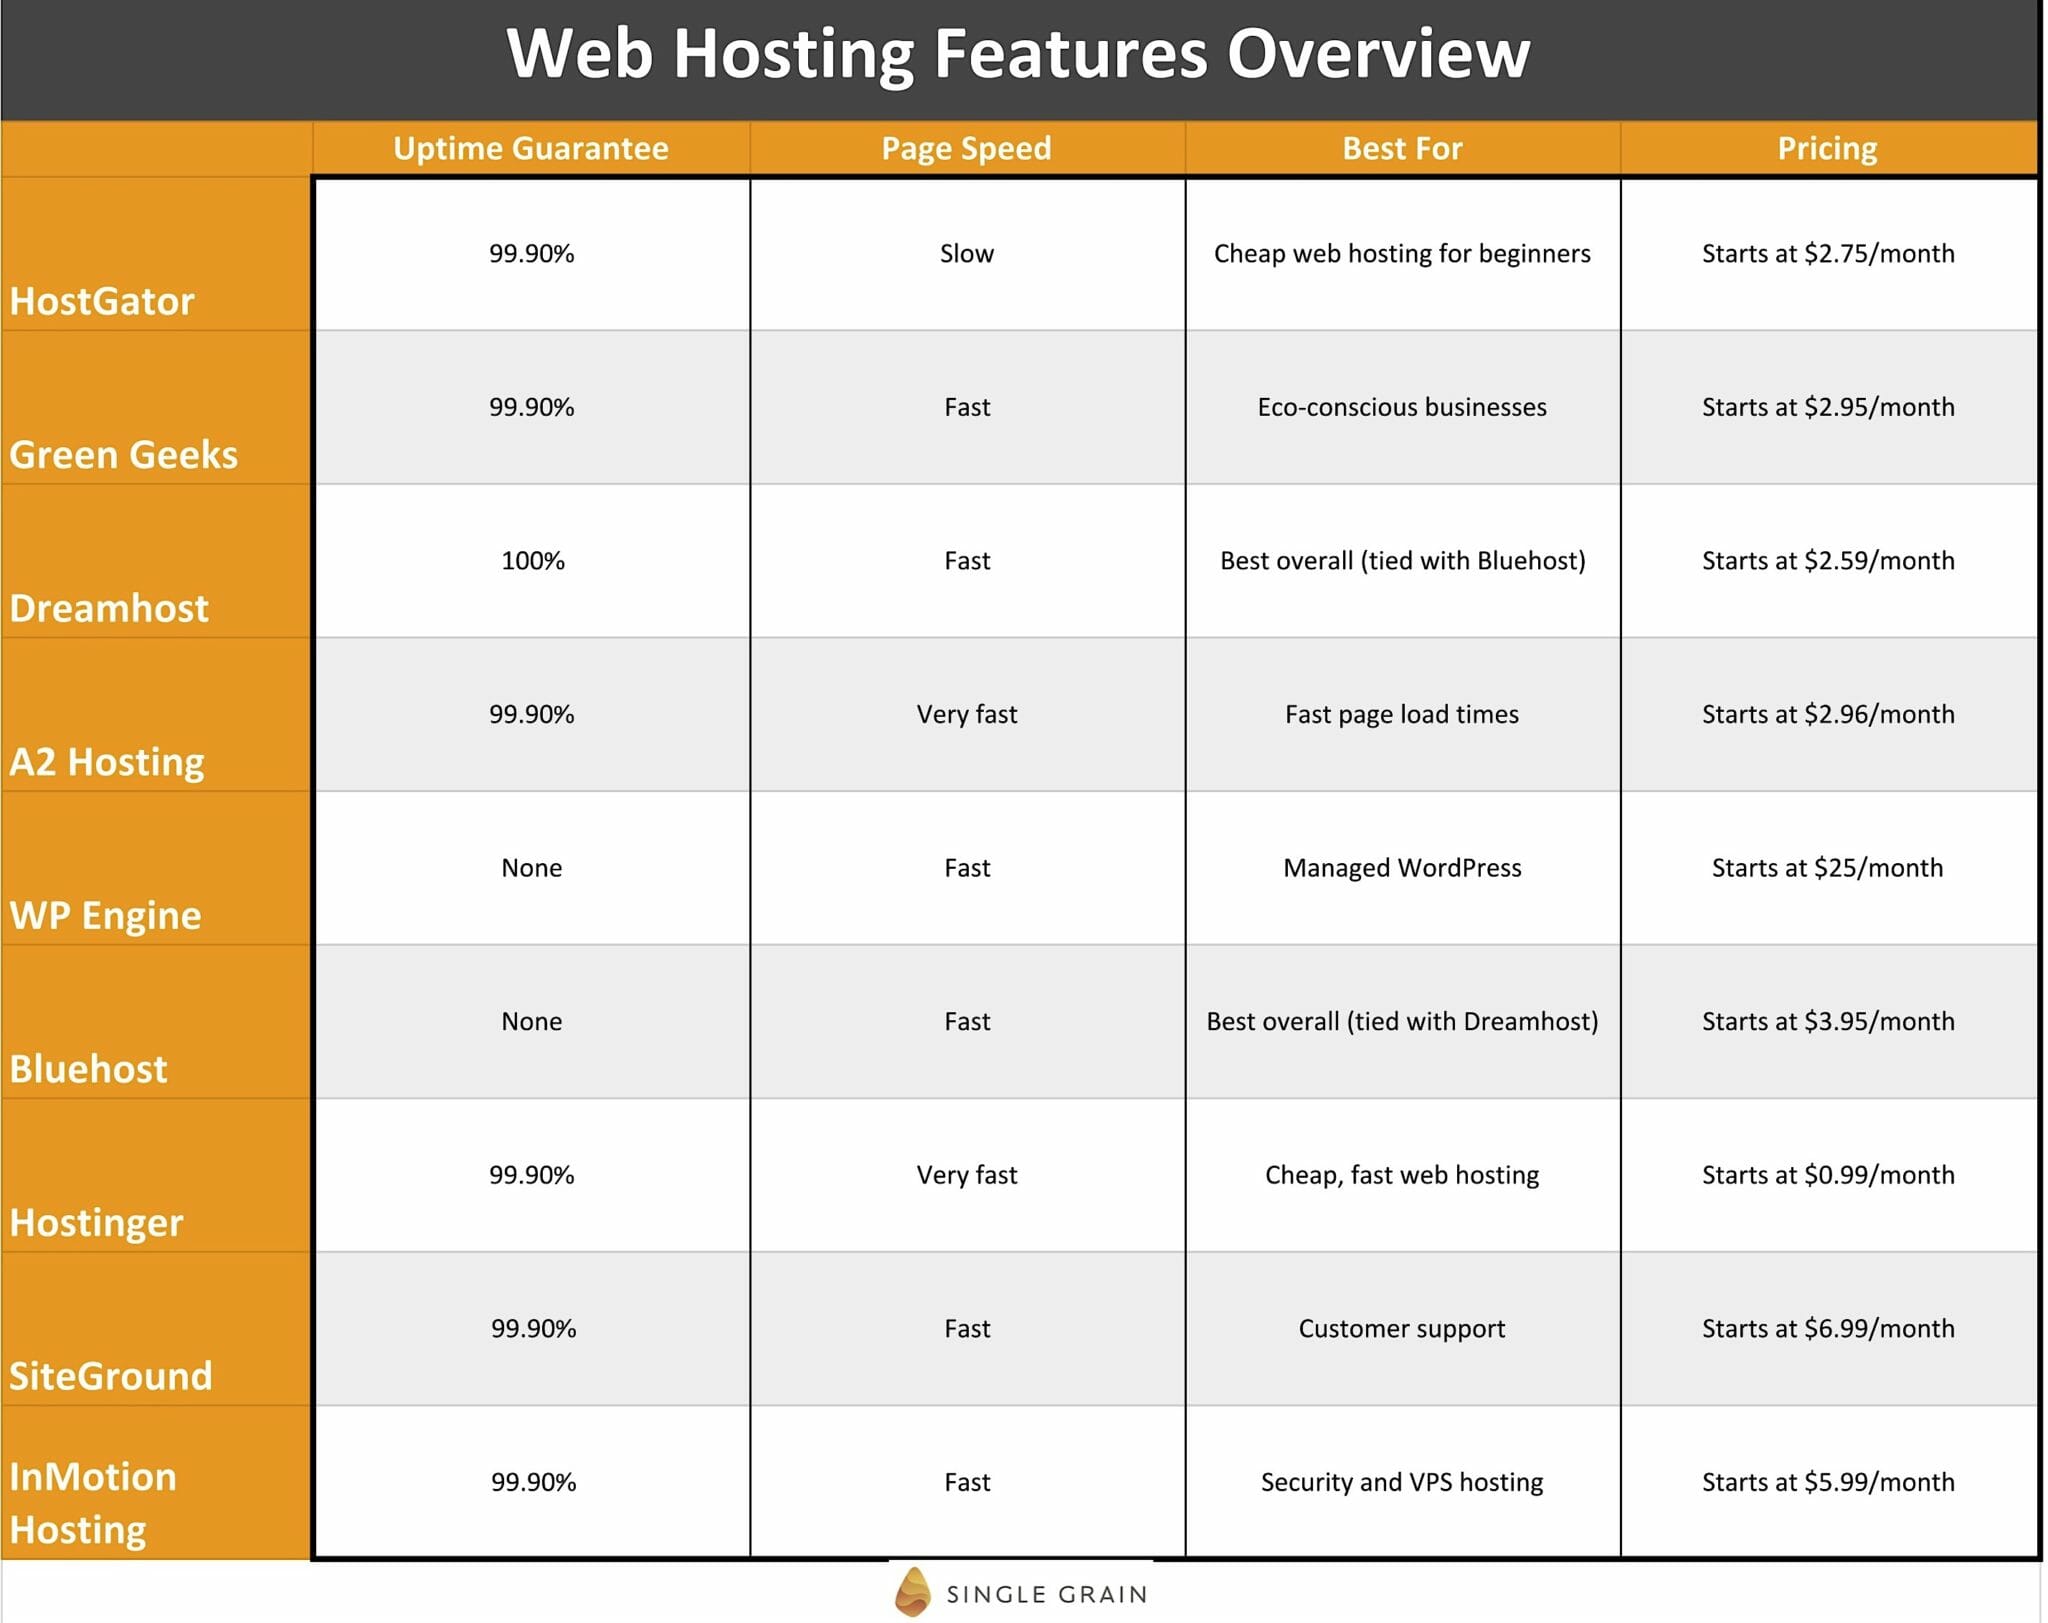 Chart - Web Hosting Features Overview